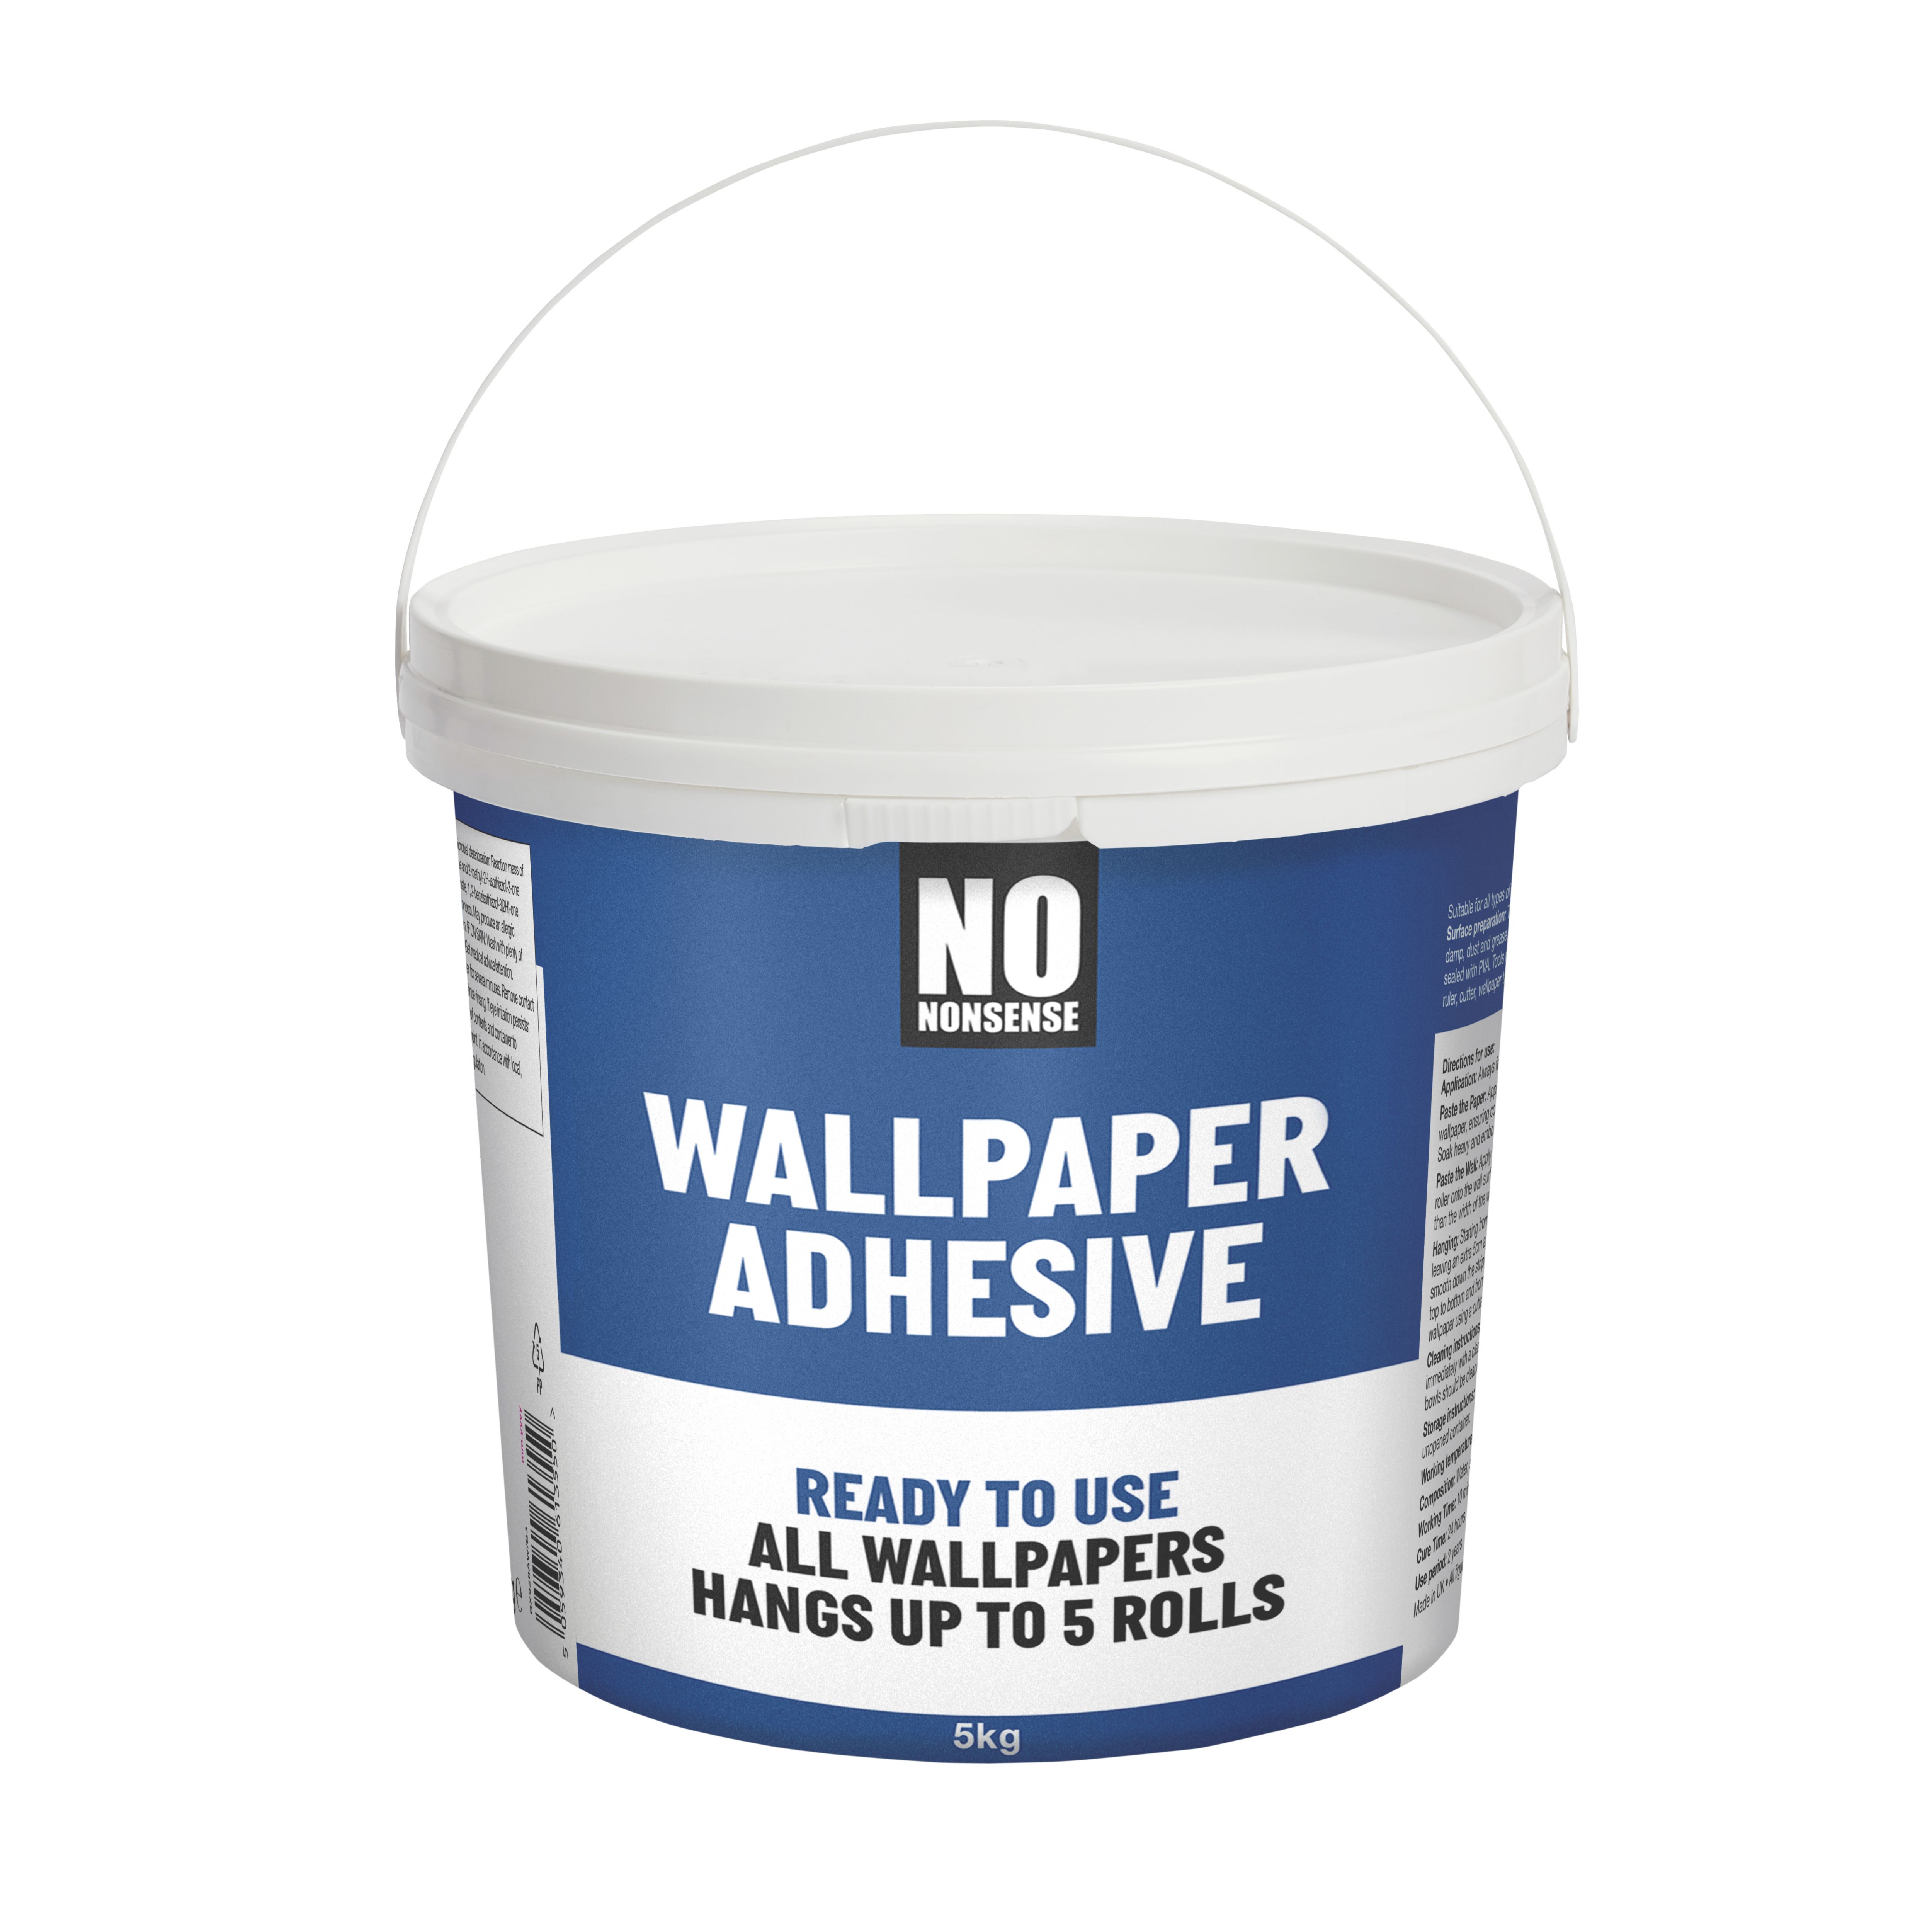 180g Diy Wallpaper Glue Powder For Gluing 3 Rolls Wallpaper (15m2), Mix  With 4kg Water